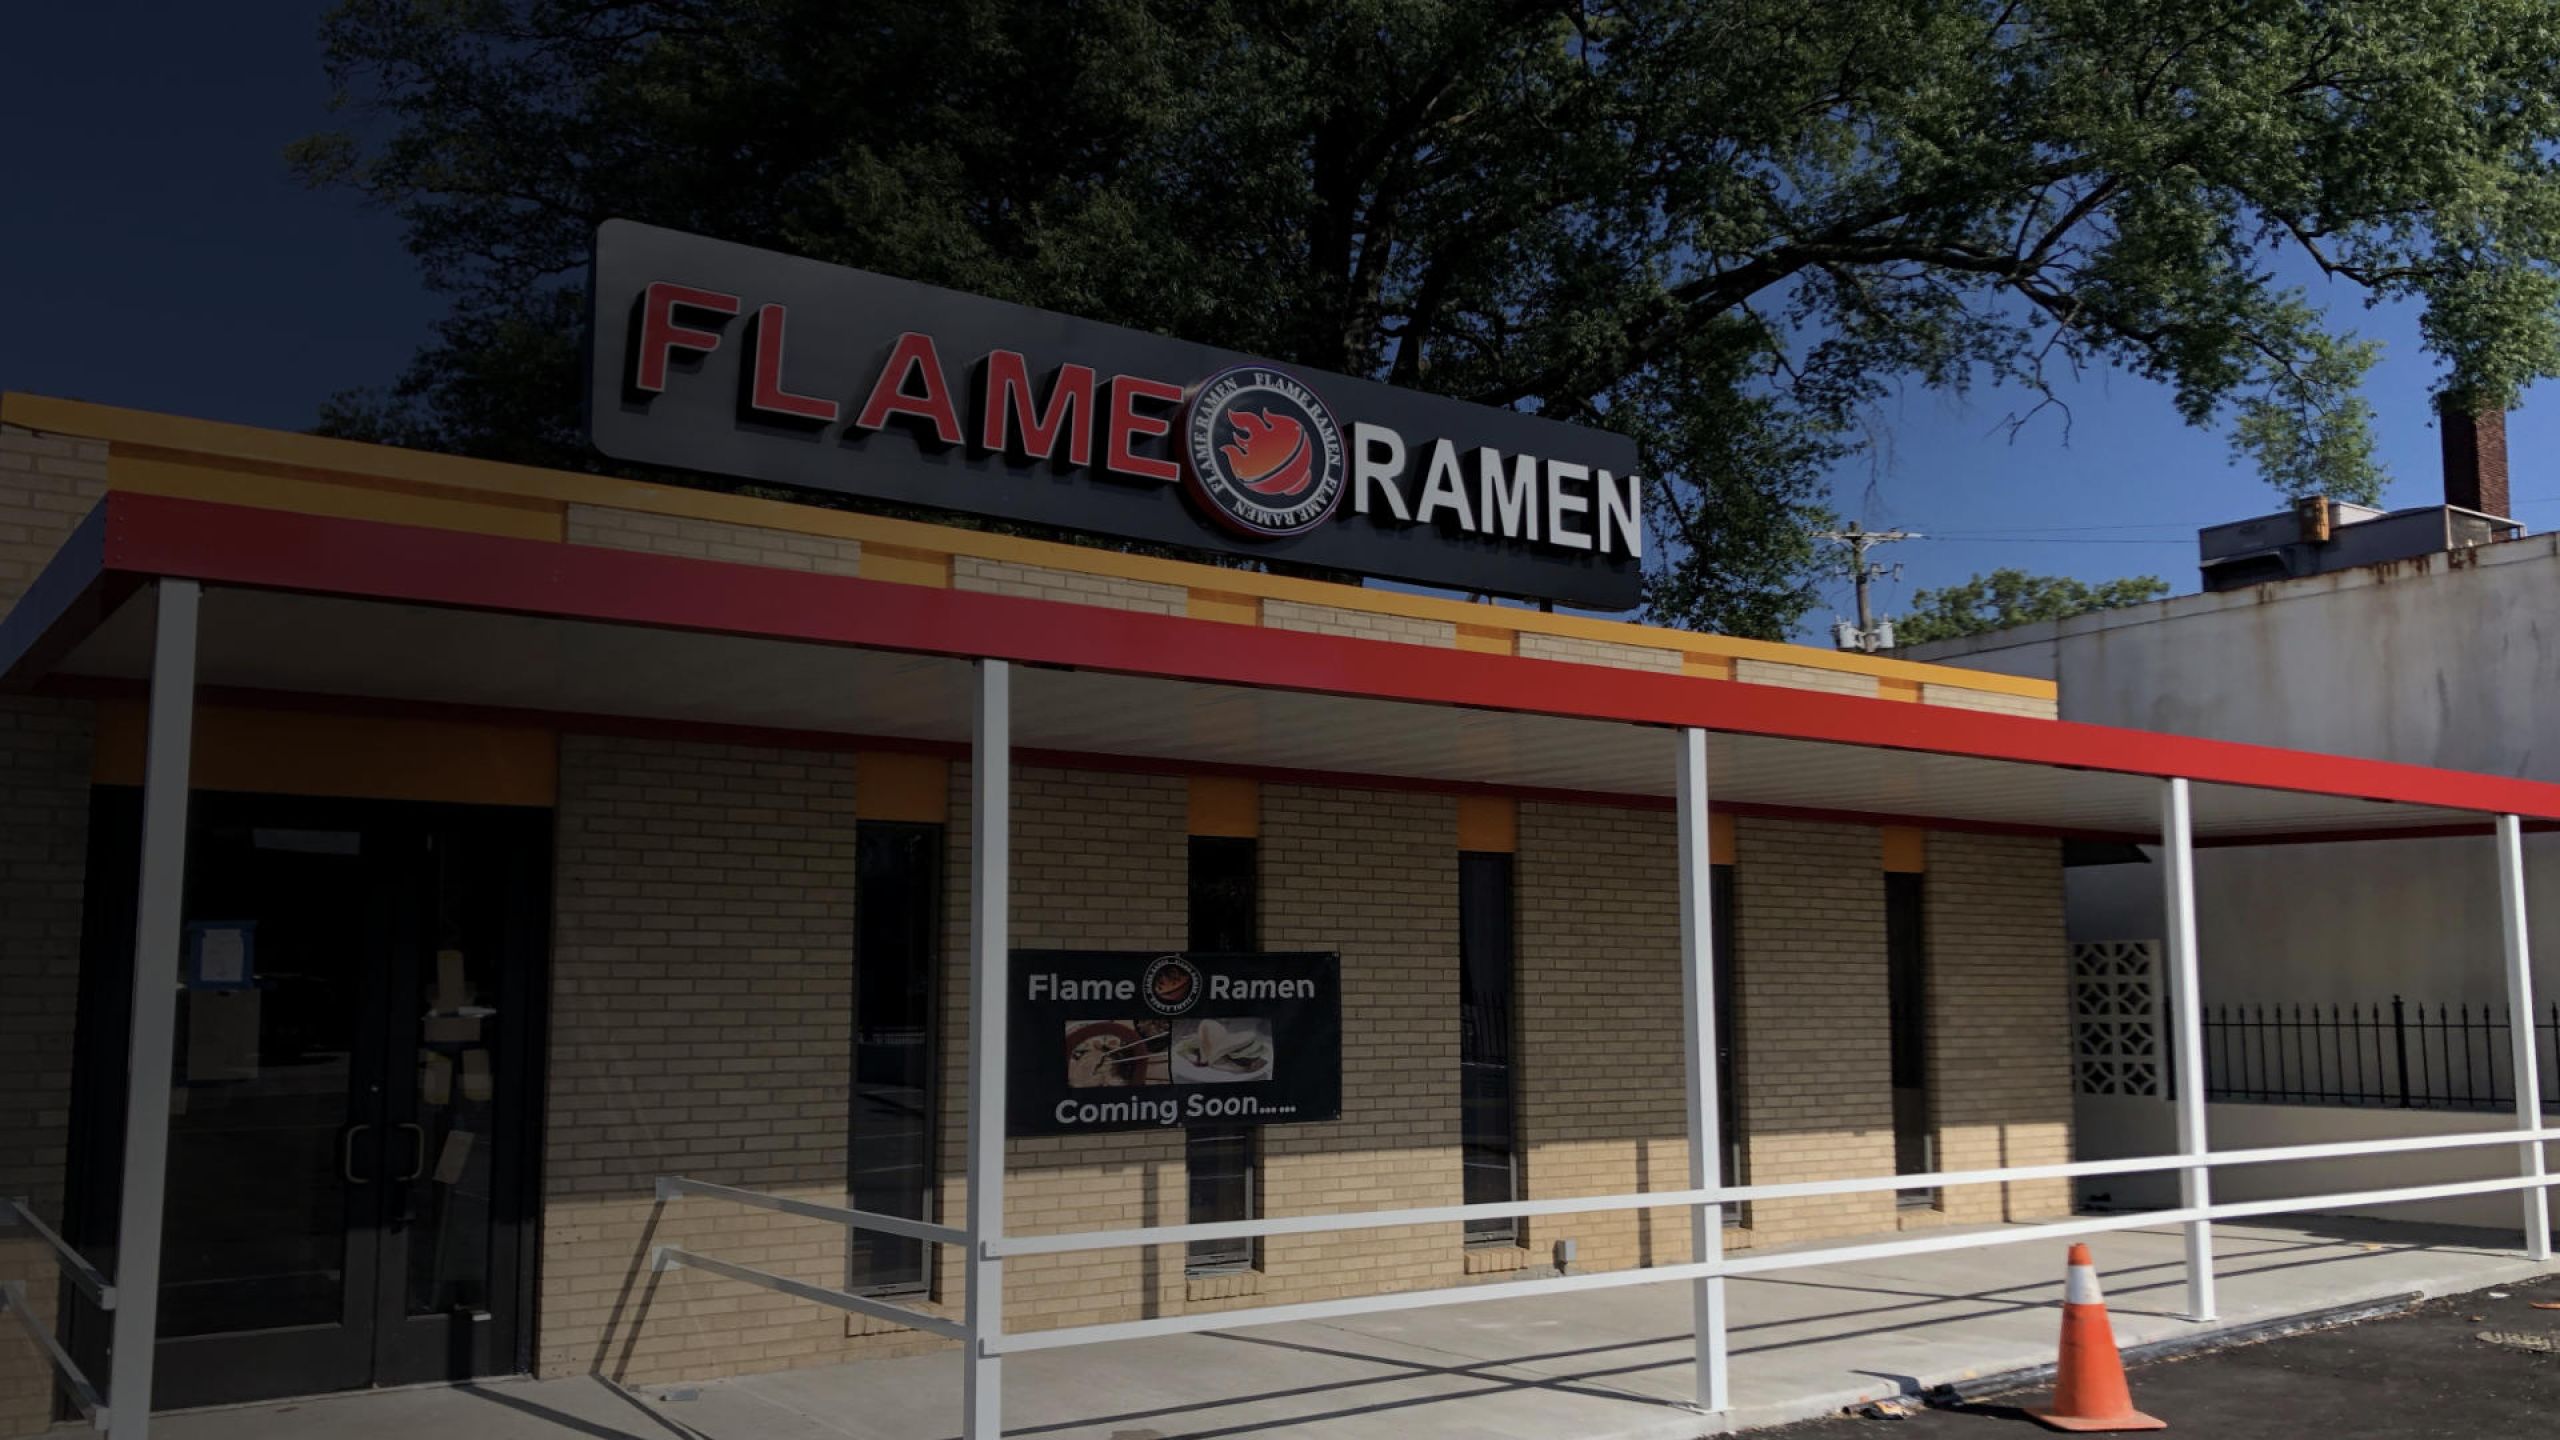 Parasol Awnings designed a Commercial Metal with Posts Patio Canopy project for Flame Ramen restaurant in Memphis, TN.